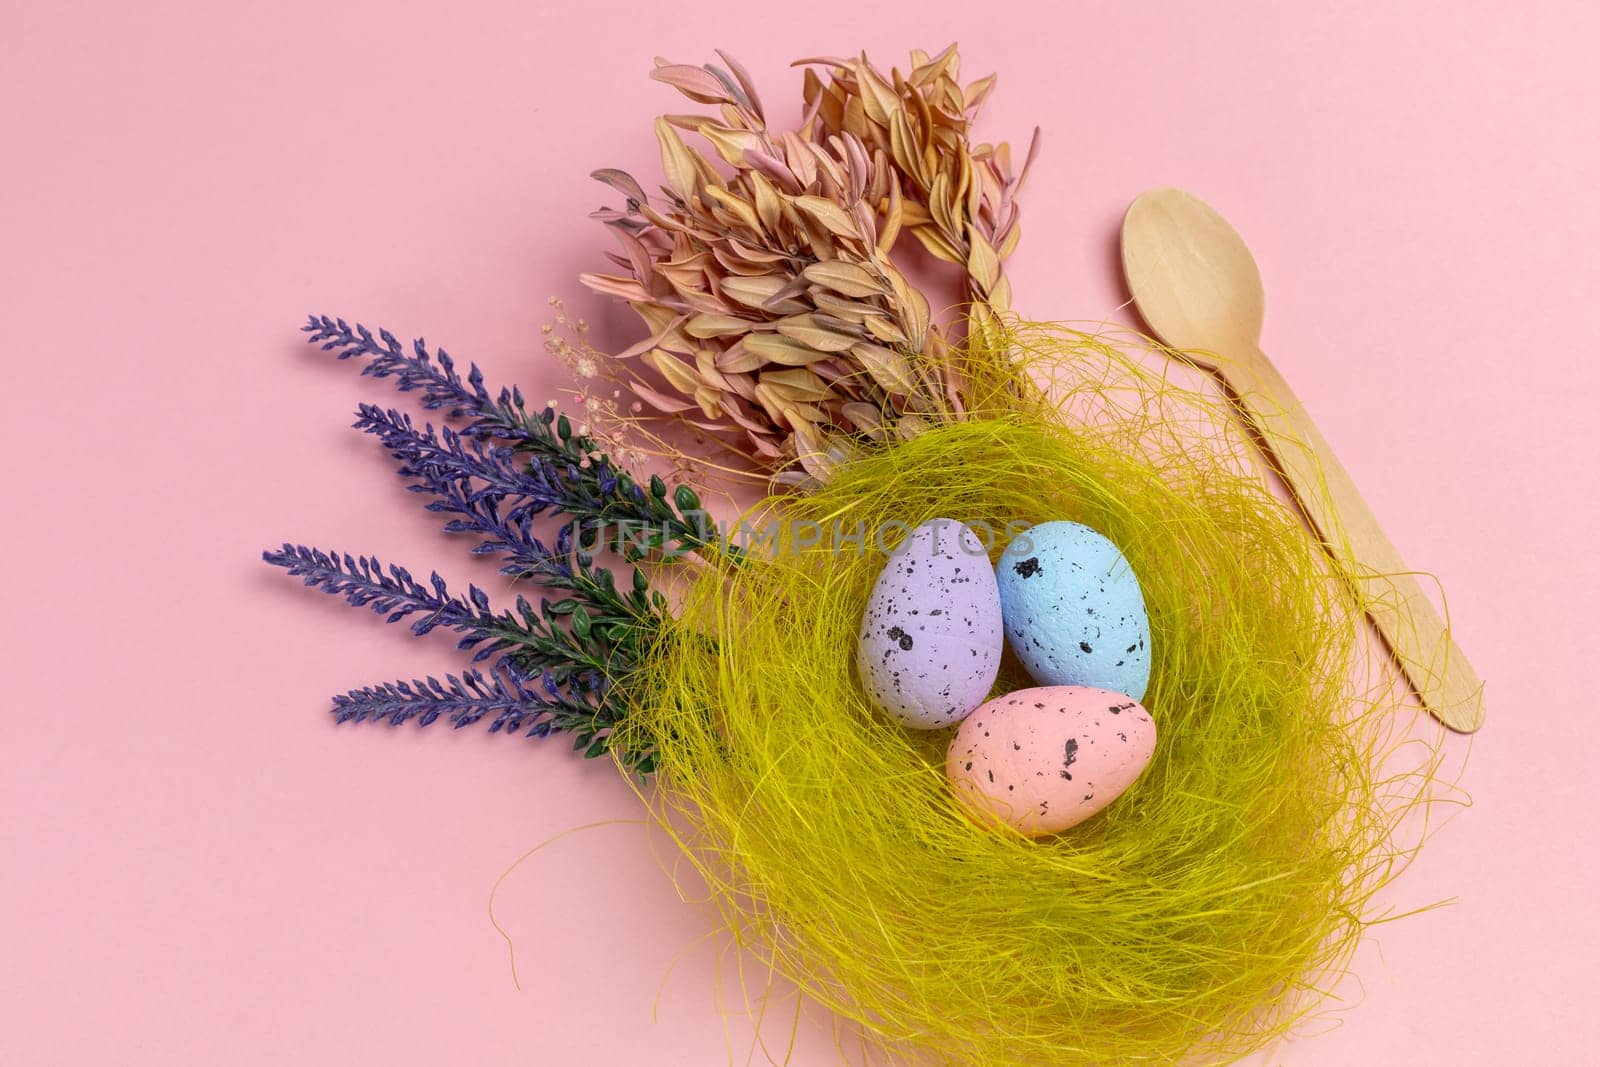 Nest with colored Easter eggs on the pink background with decor plants and a wooden spoon. Top view.